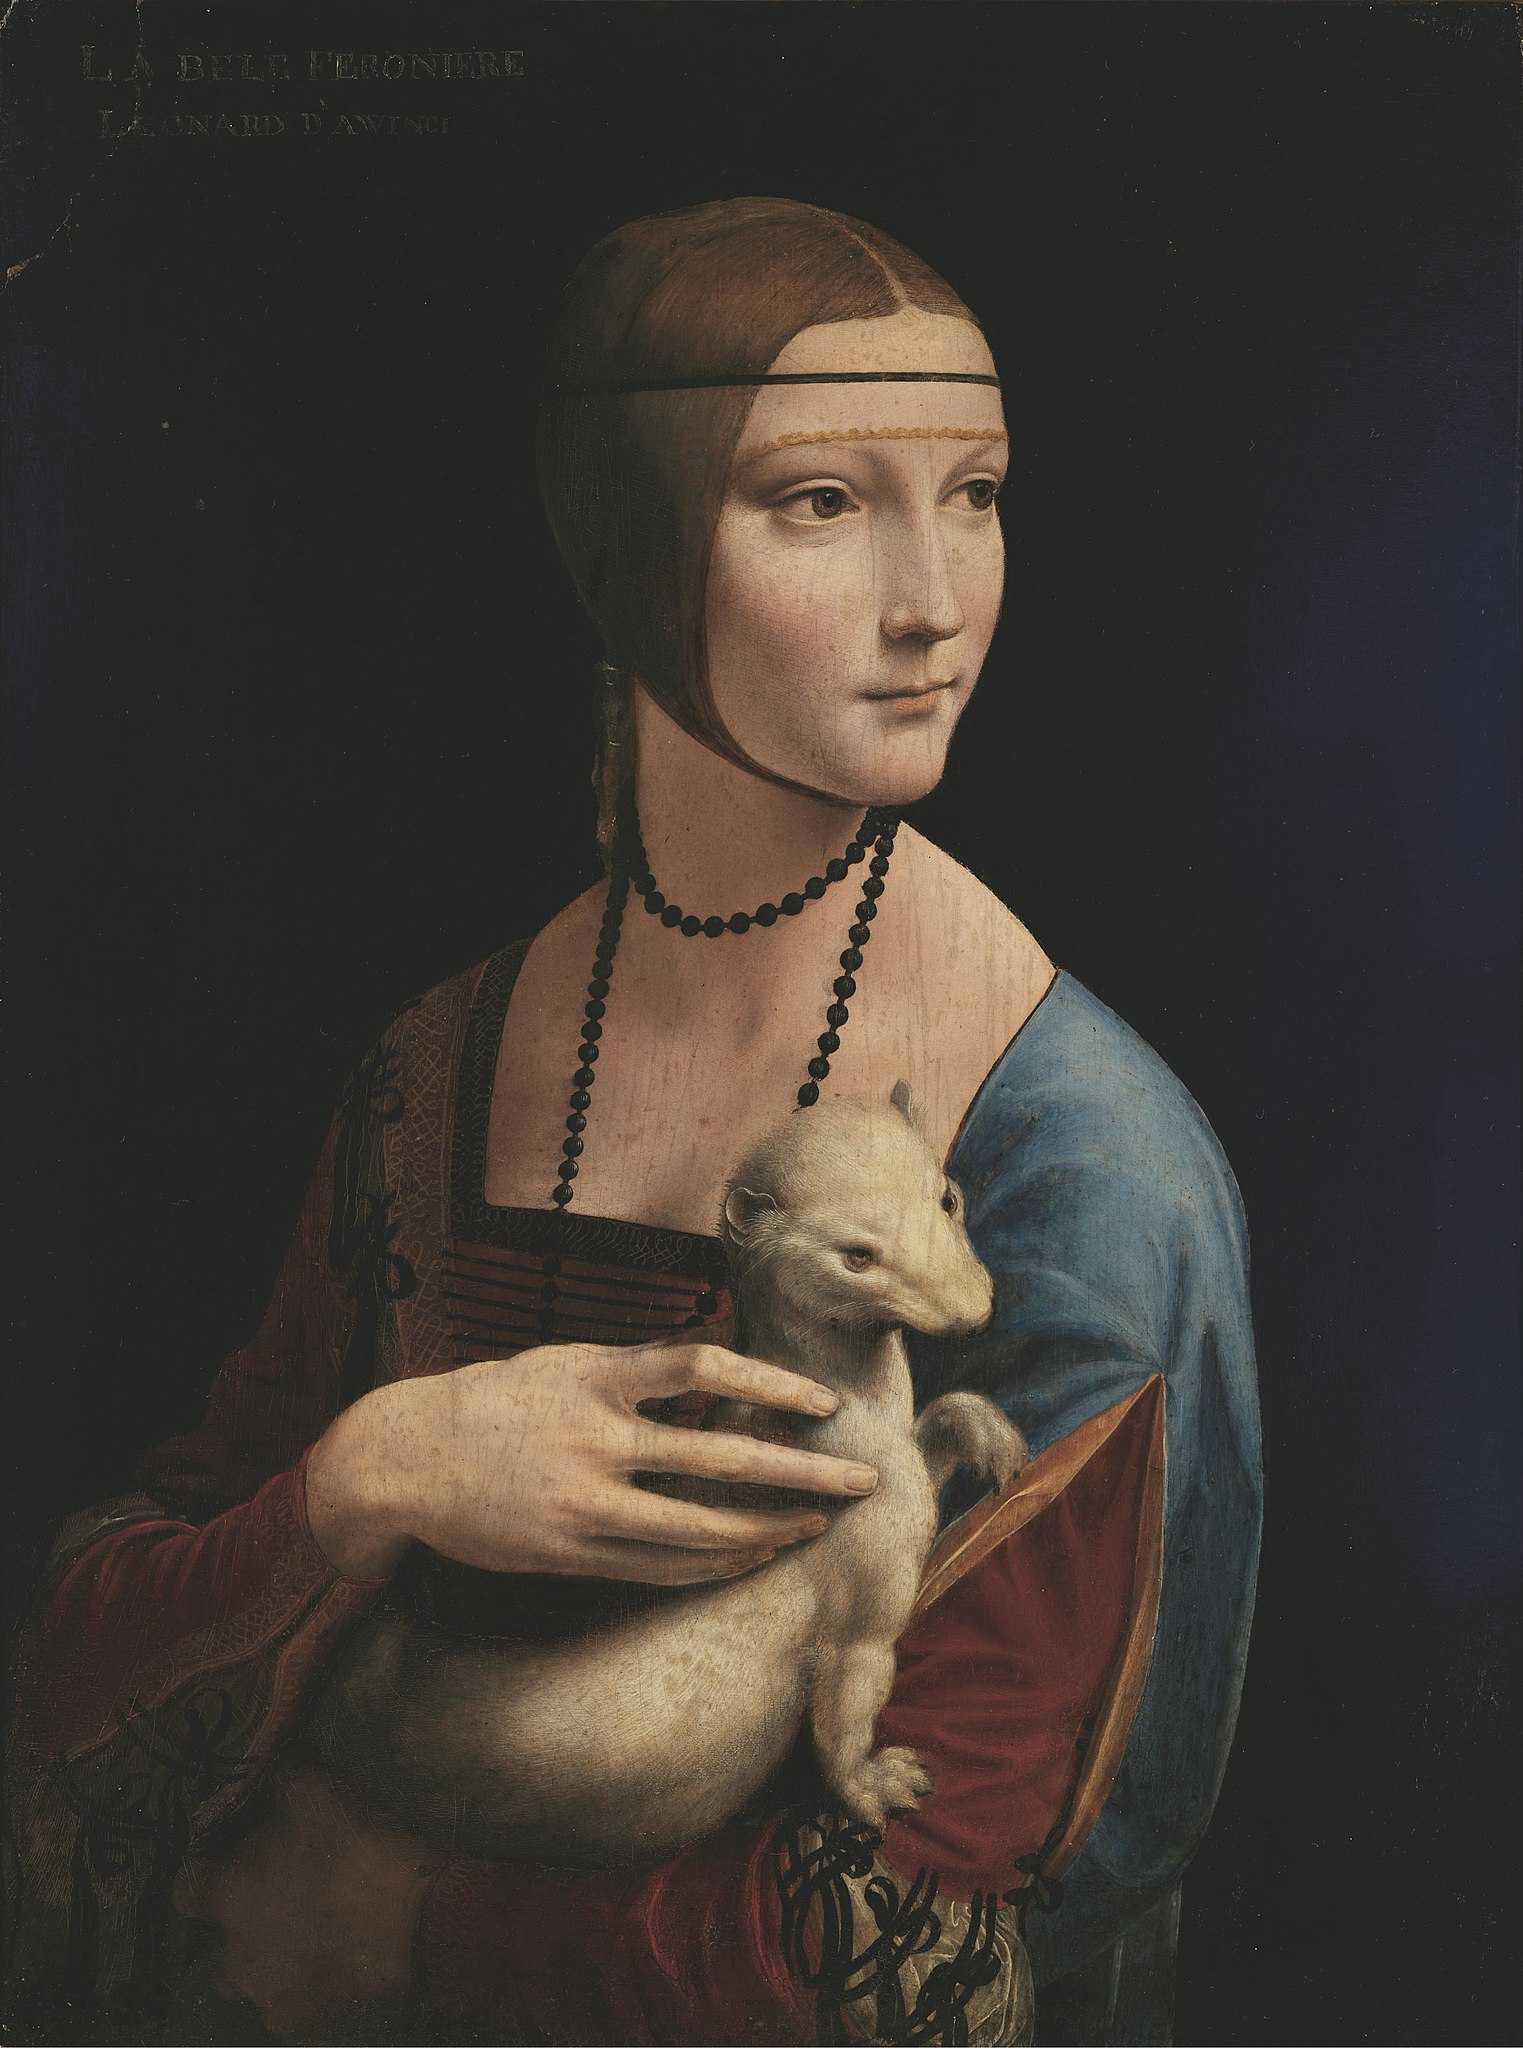 Find out more about Leonardo da Vinci - Lady with an Ermine